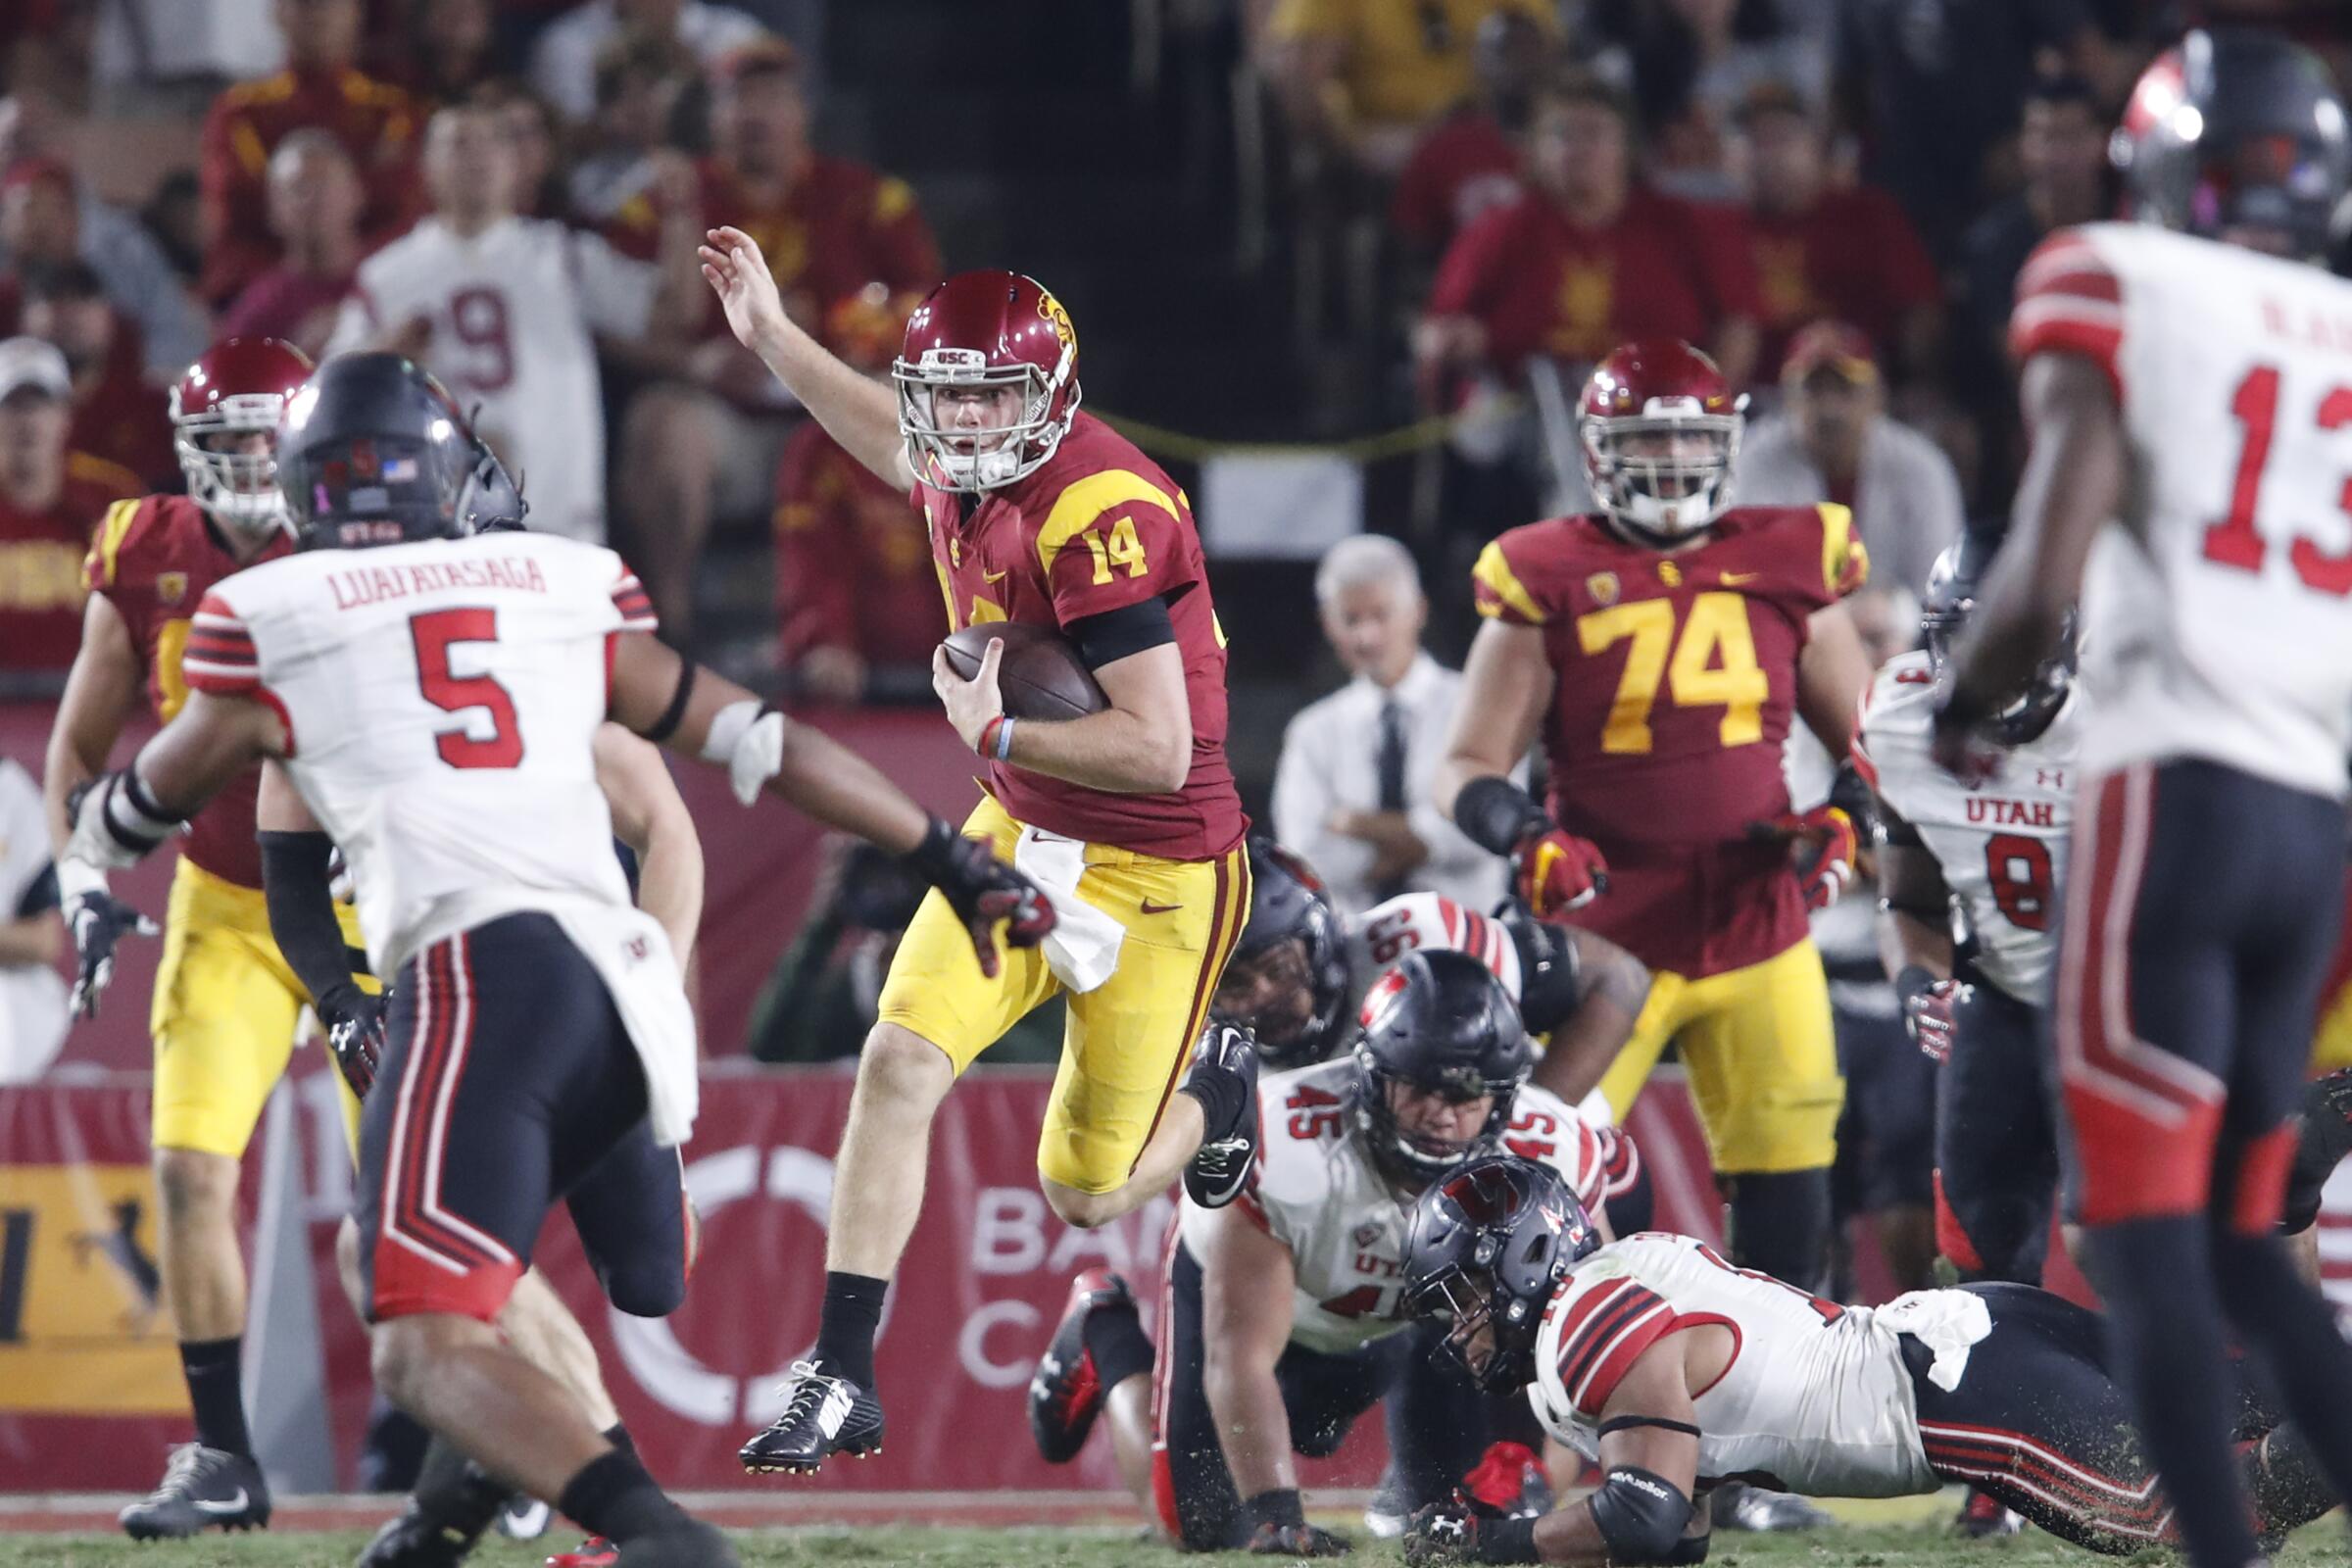 USC quarterback Sam Darnold leaps while running with the ball against Utah at the Coliseum.